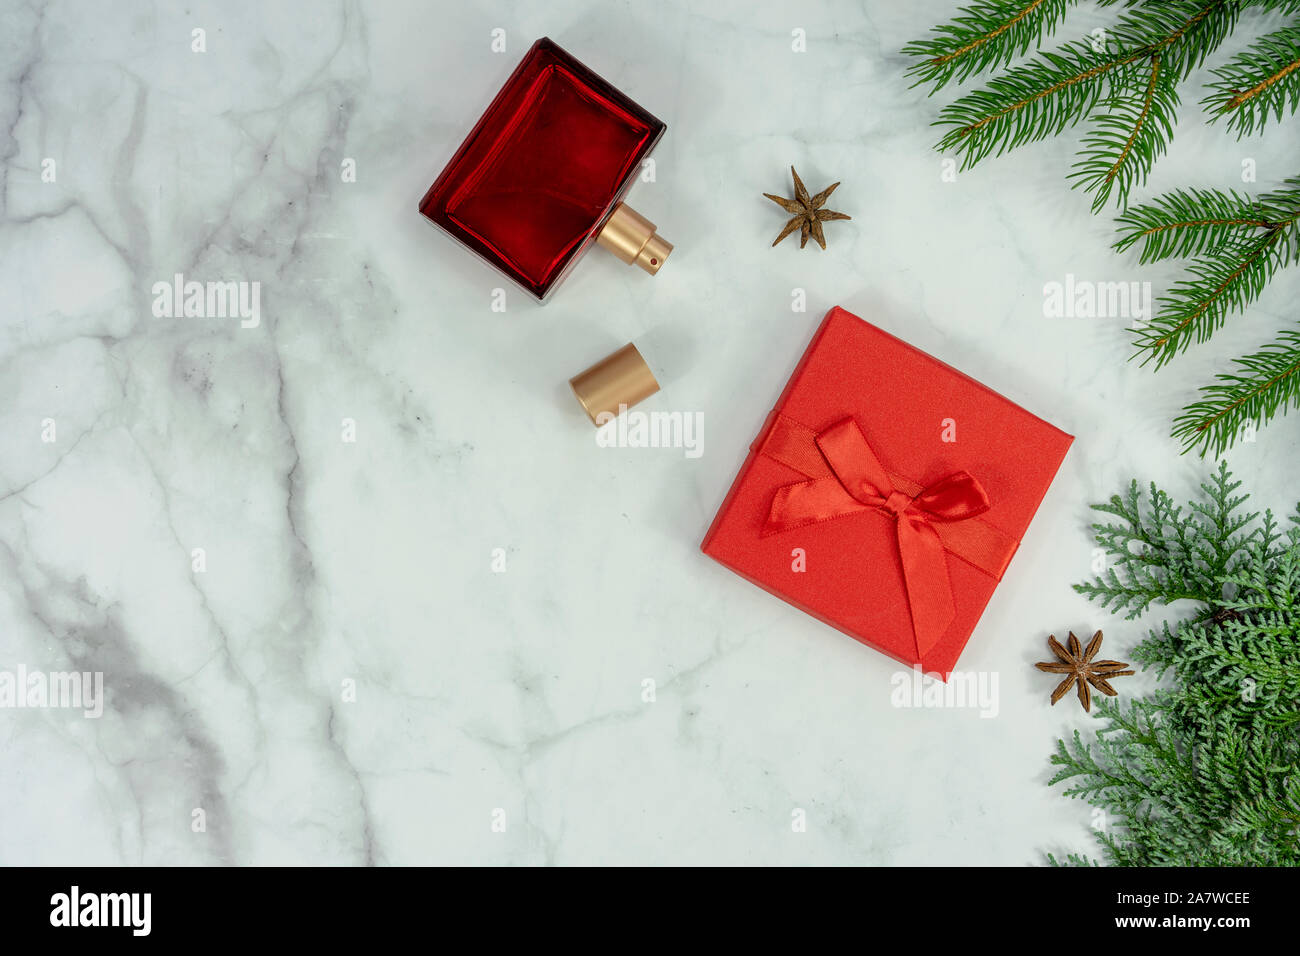 Christmas frame background flat lay on marbel with decoration gift box and perfume . Stock Photo